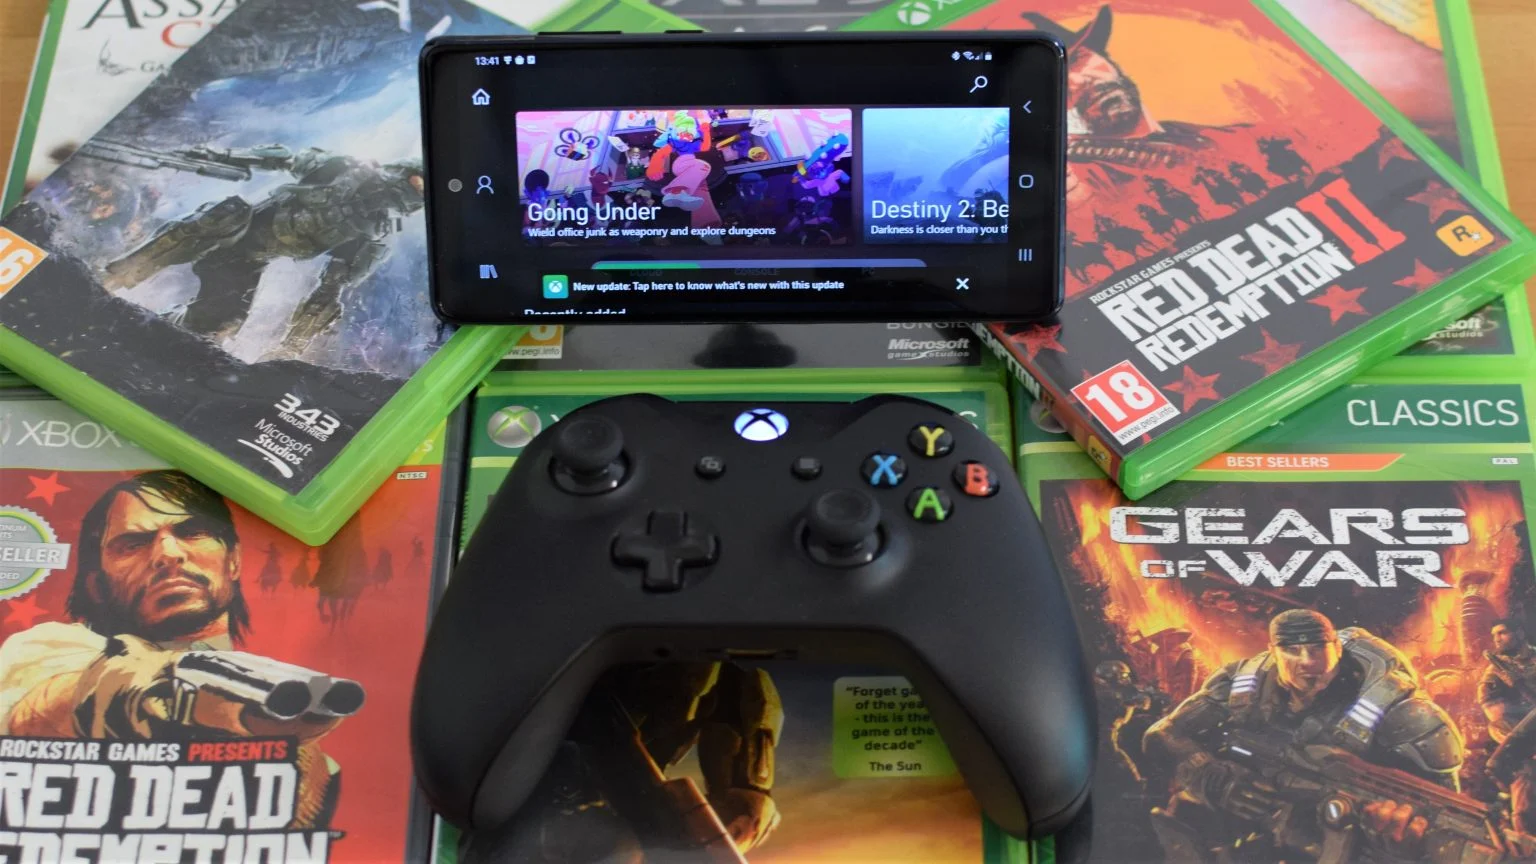 Microsoft wants to build an Xbox mobile gaming store